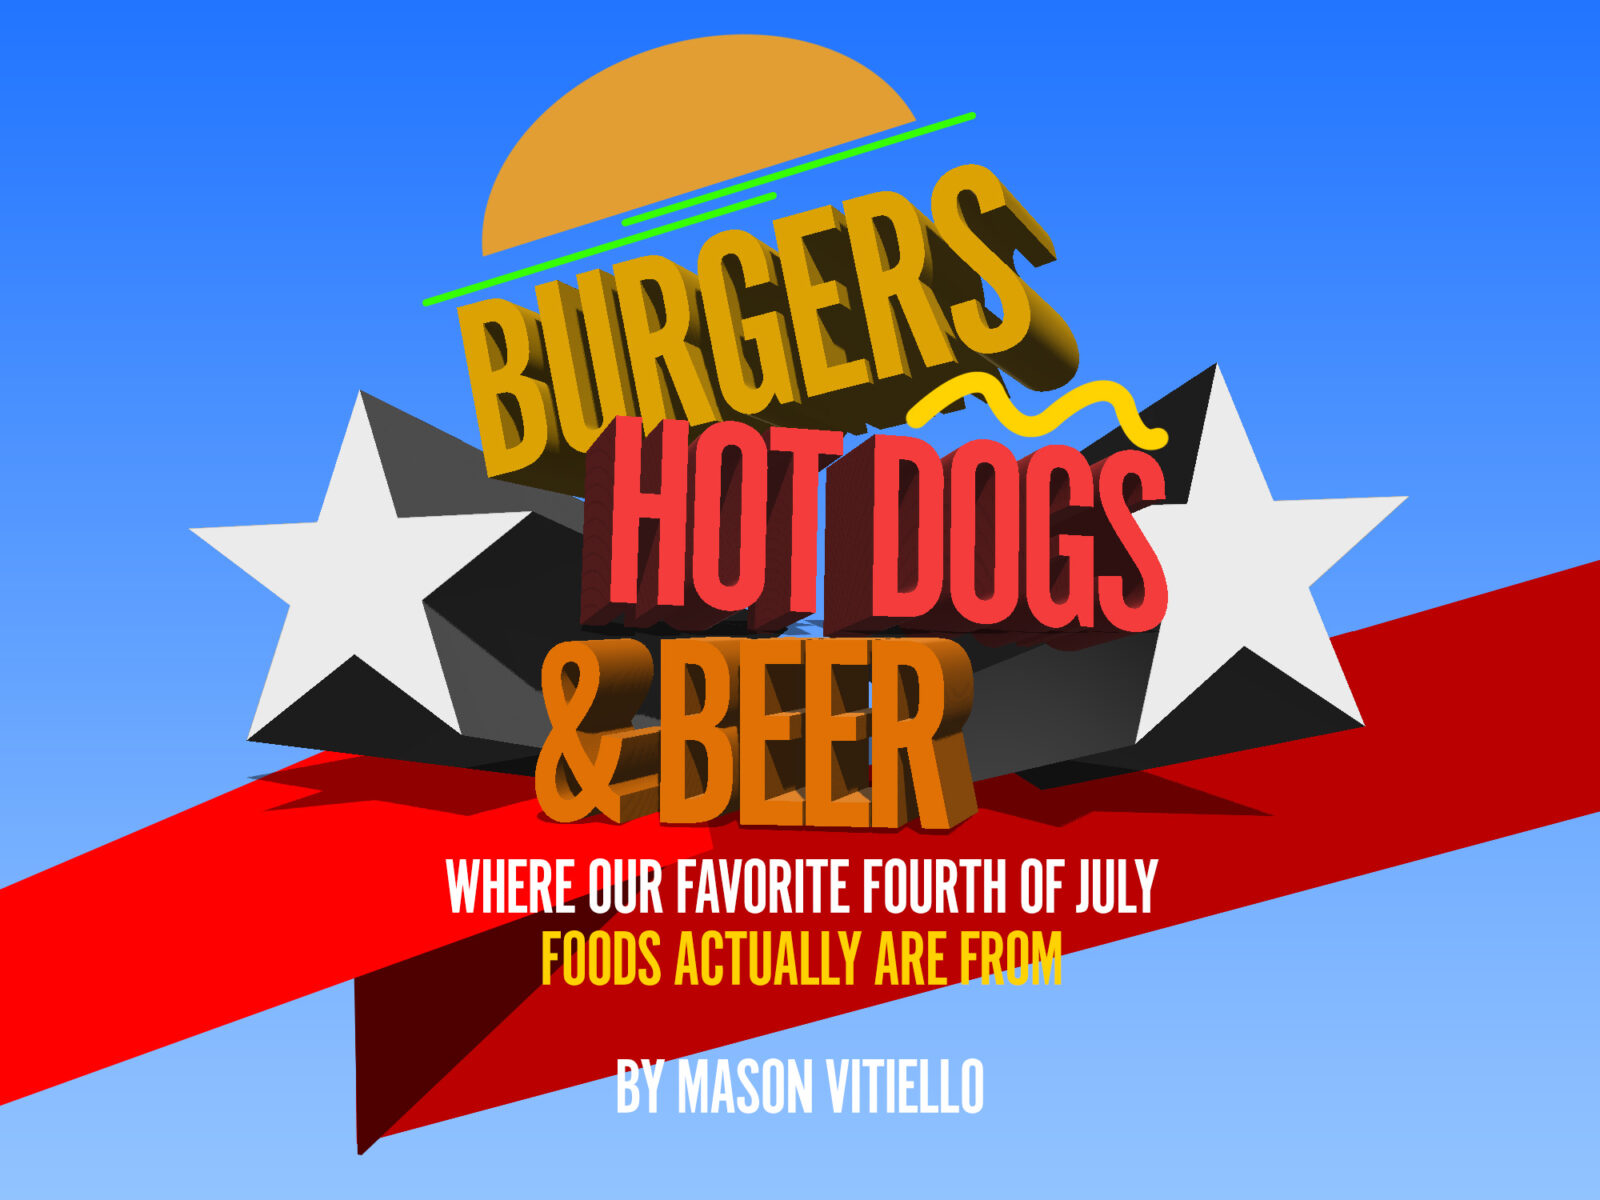 Burgers, hot dogs and beer – where our favorite July 4th foods are really from